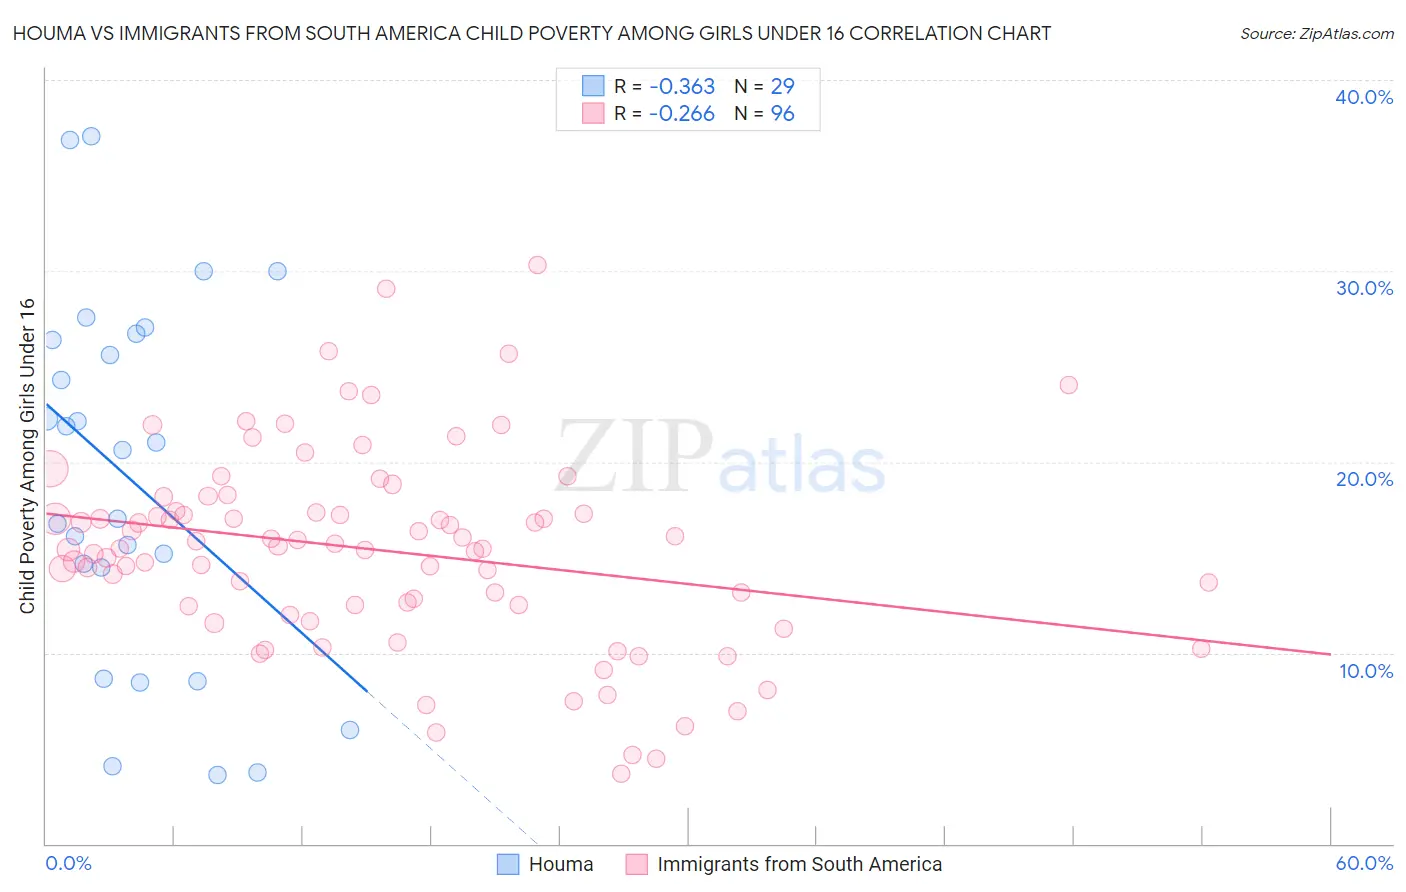 Houma vs Immigrants from South America Child Poverty Among Girls Under 16